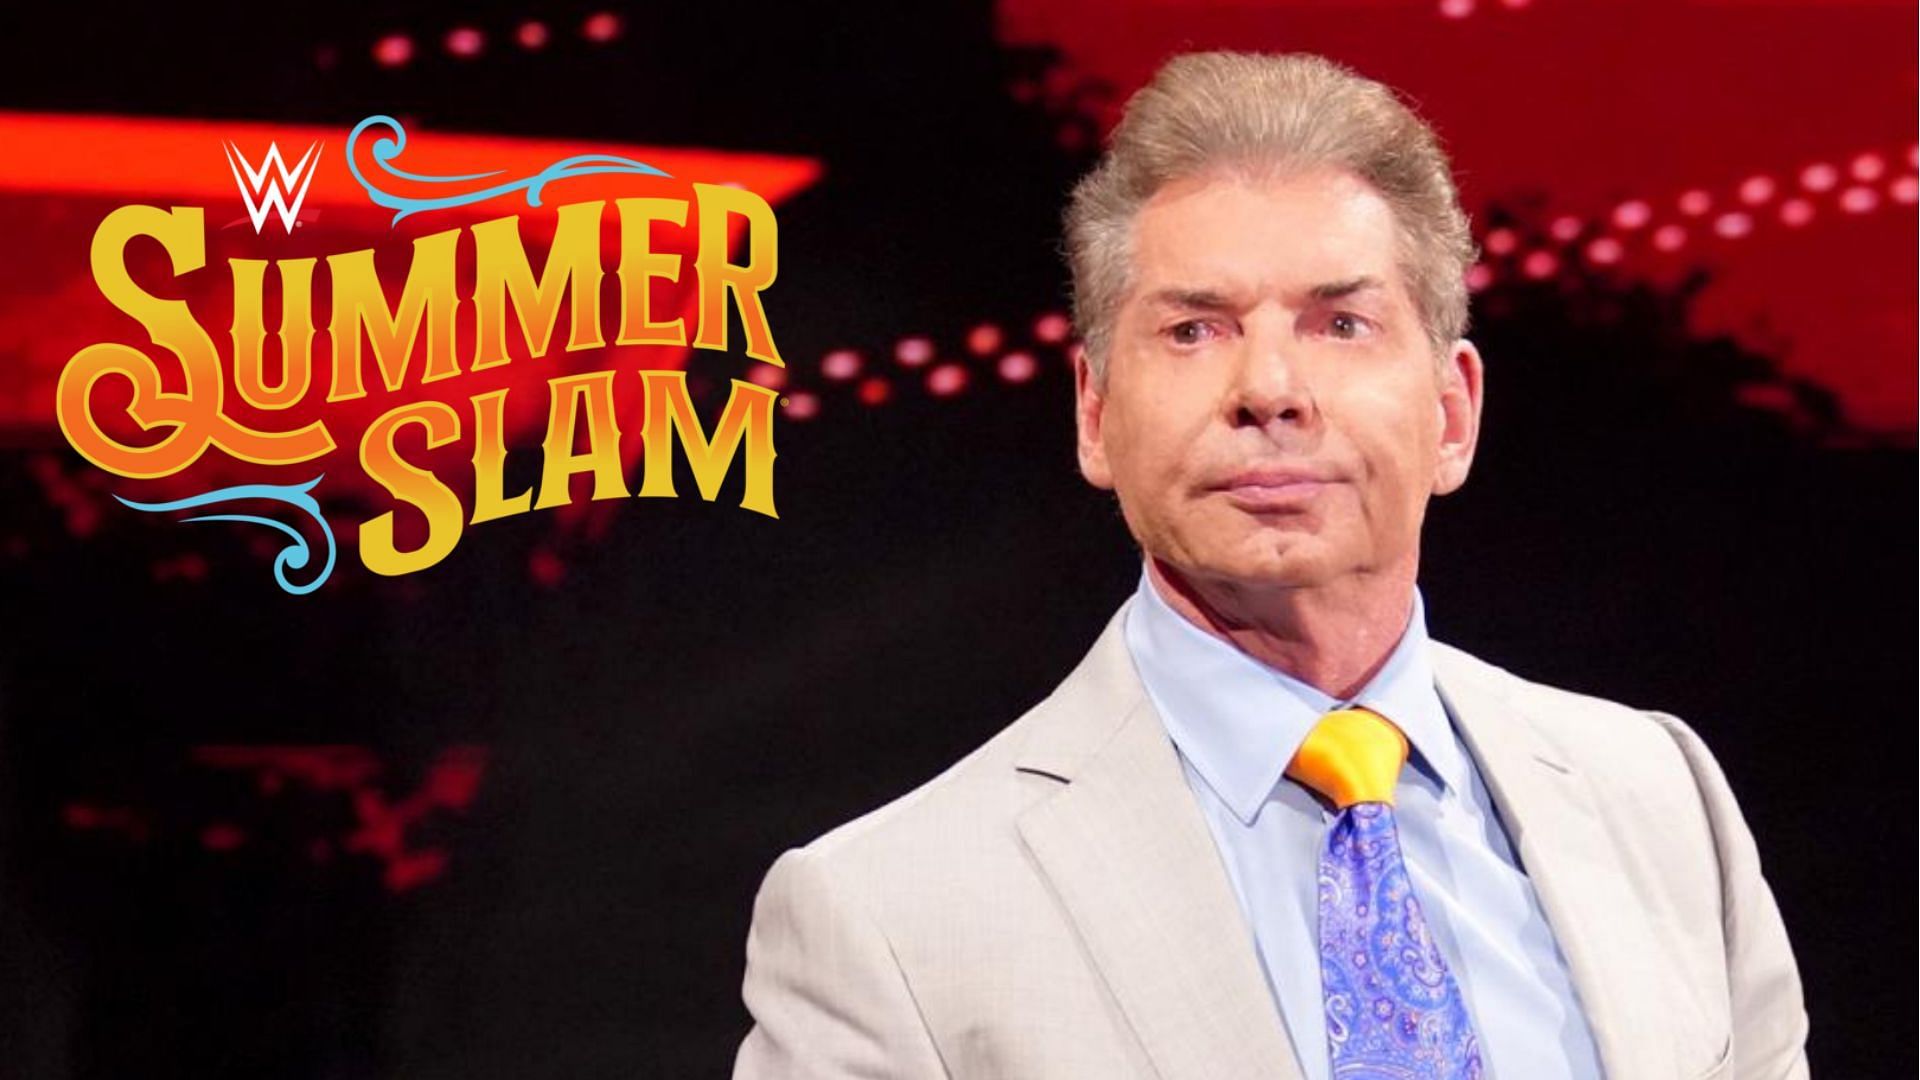 This was the first premium live special not to be handled by Vince McMahon